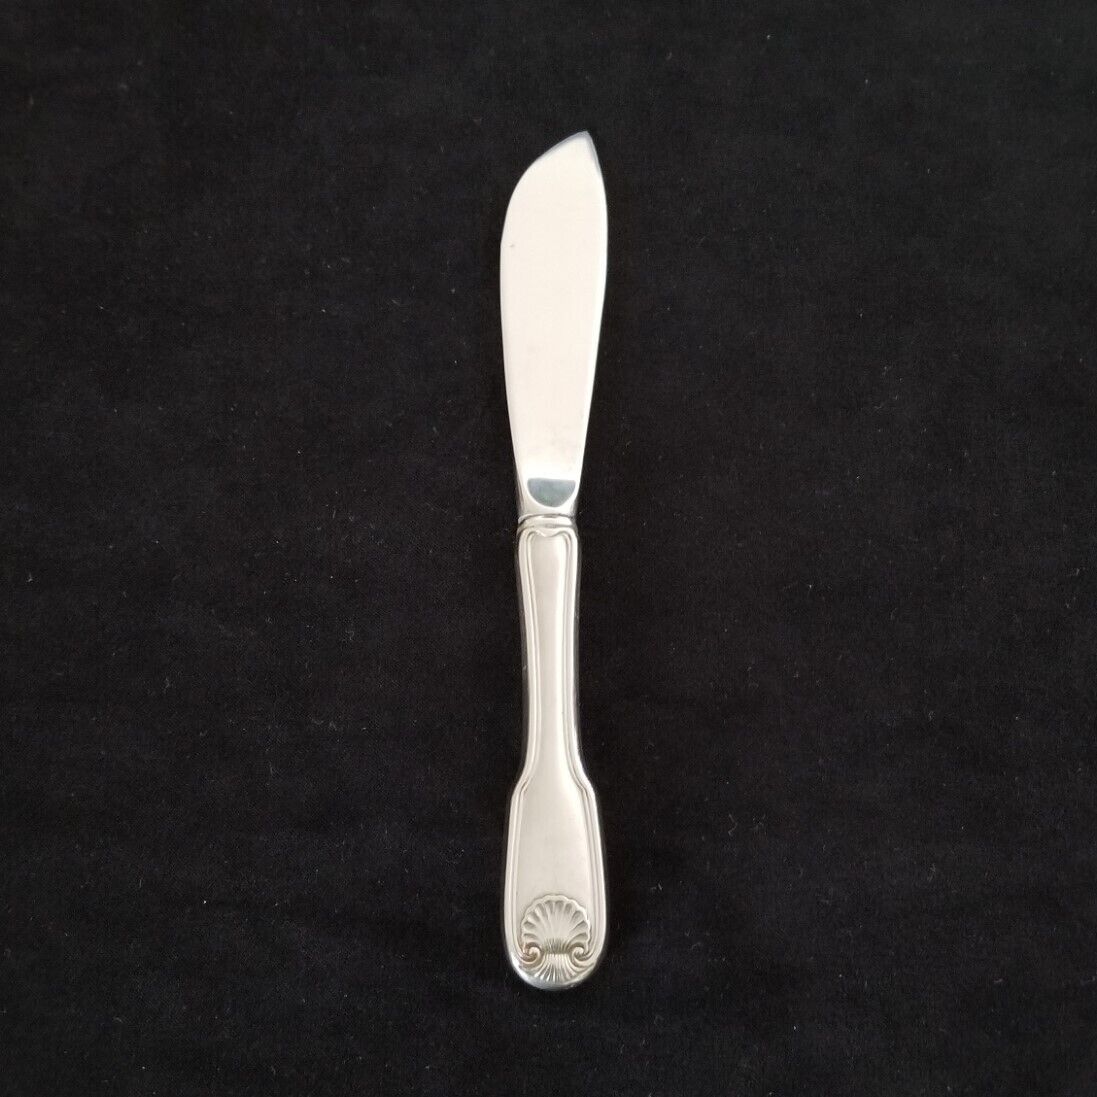 REED & BARTON COLONIAL SHELL STAINLESS STEEL BUTTER KNIFE FLATWARE